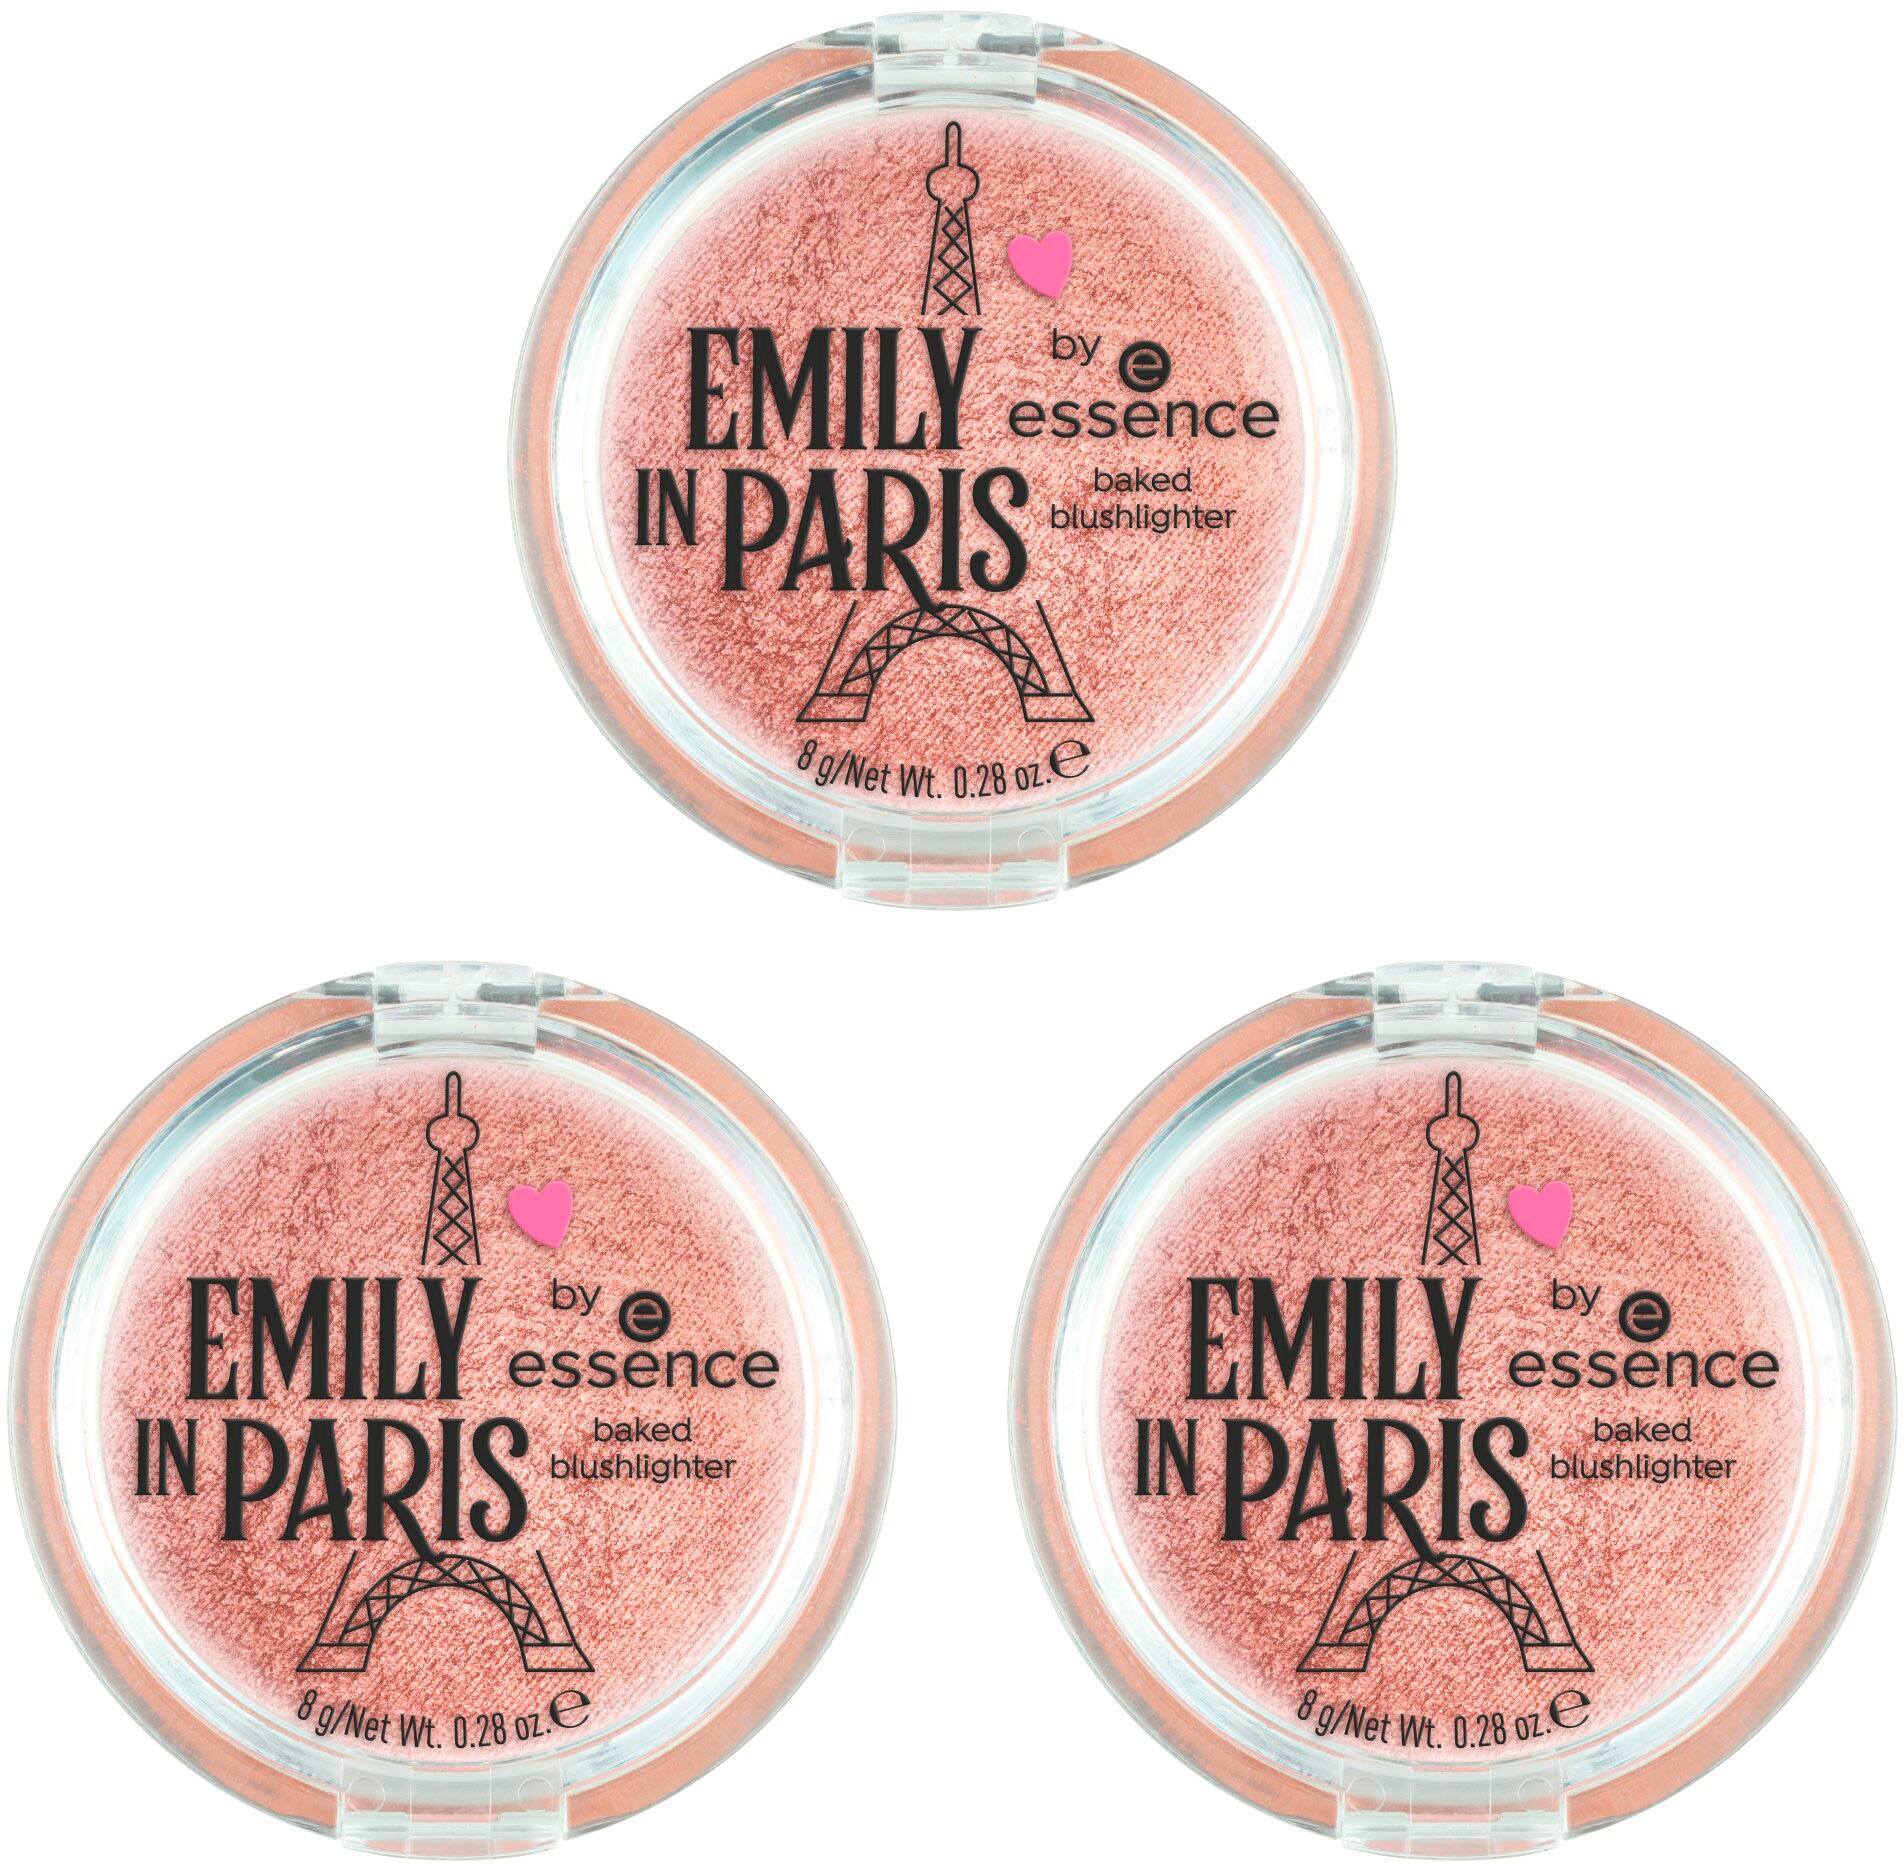 Essence Rouge »EMILY IN essence bei PARIS baked online blushlighter« by